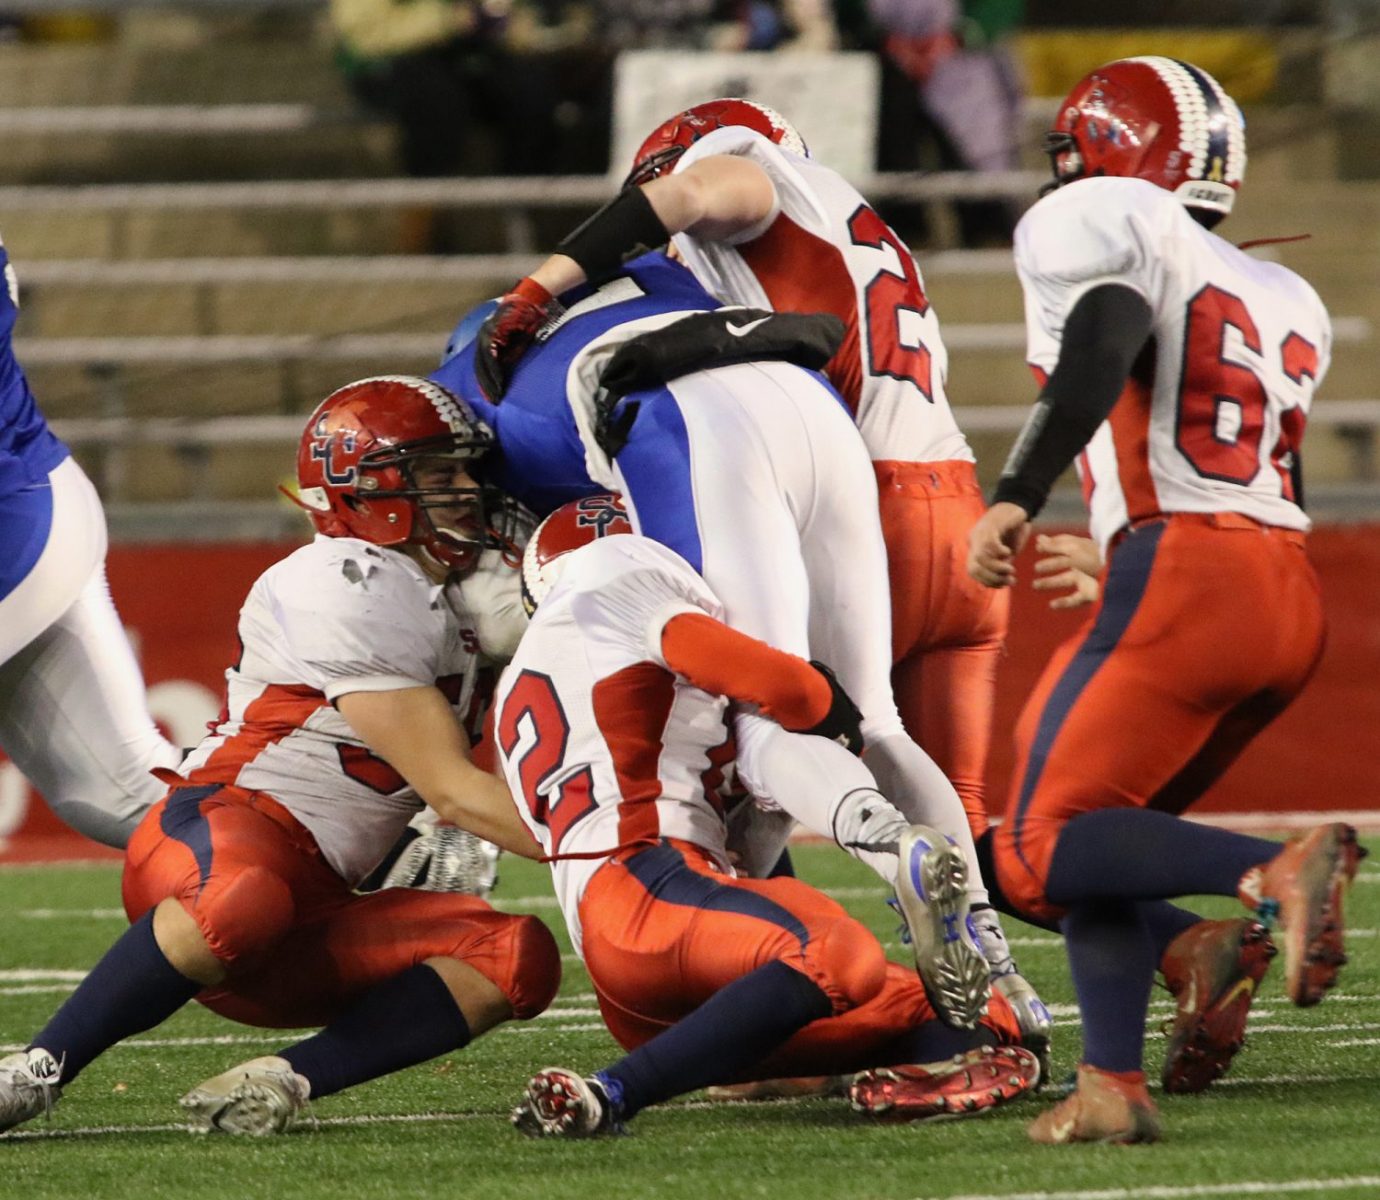 Spencer/Columbus defenders gang tackle an Amherst runner as the Rockets lost to Amherst 42-0 in the WIAA Division 5 State Championship Game at Camp Randall Stadium in Madison, Thursday, Nov. 19, 2015.